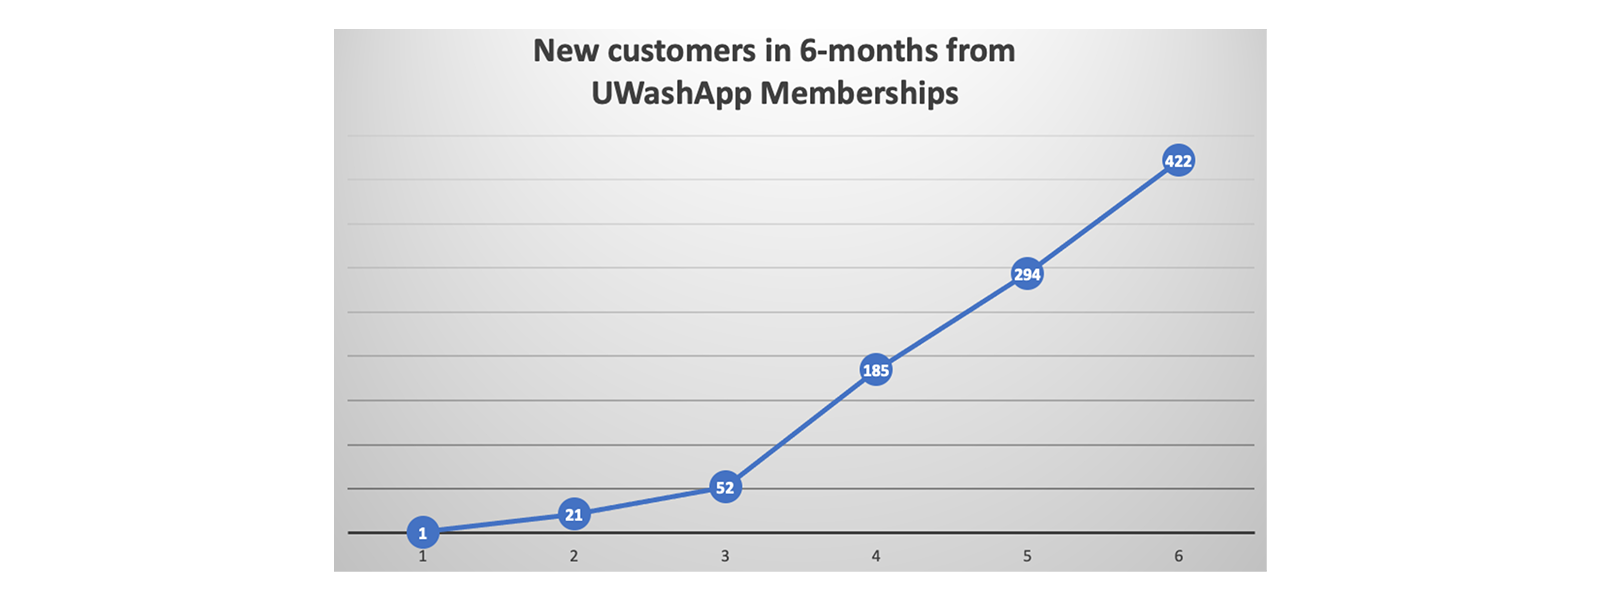 Over 400 New Customers in Six Months